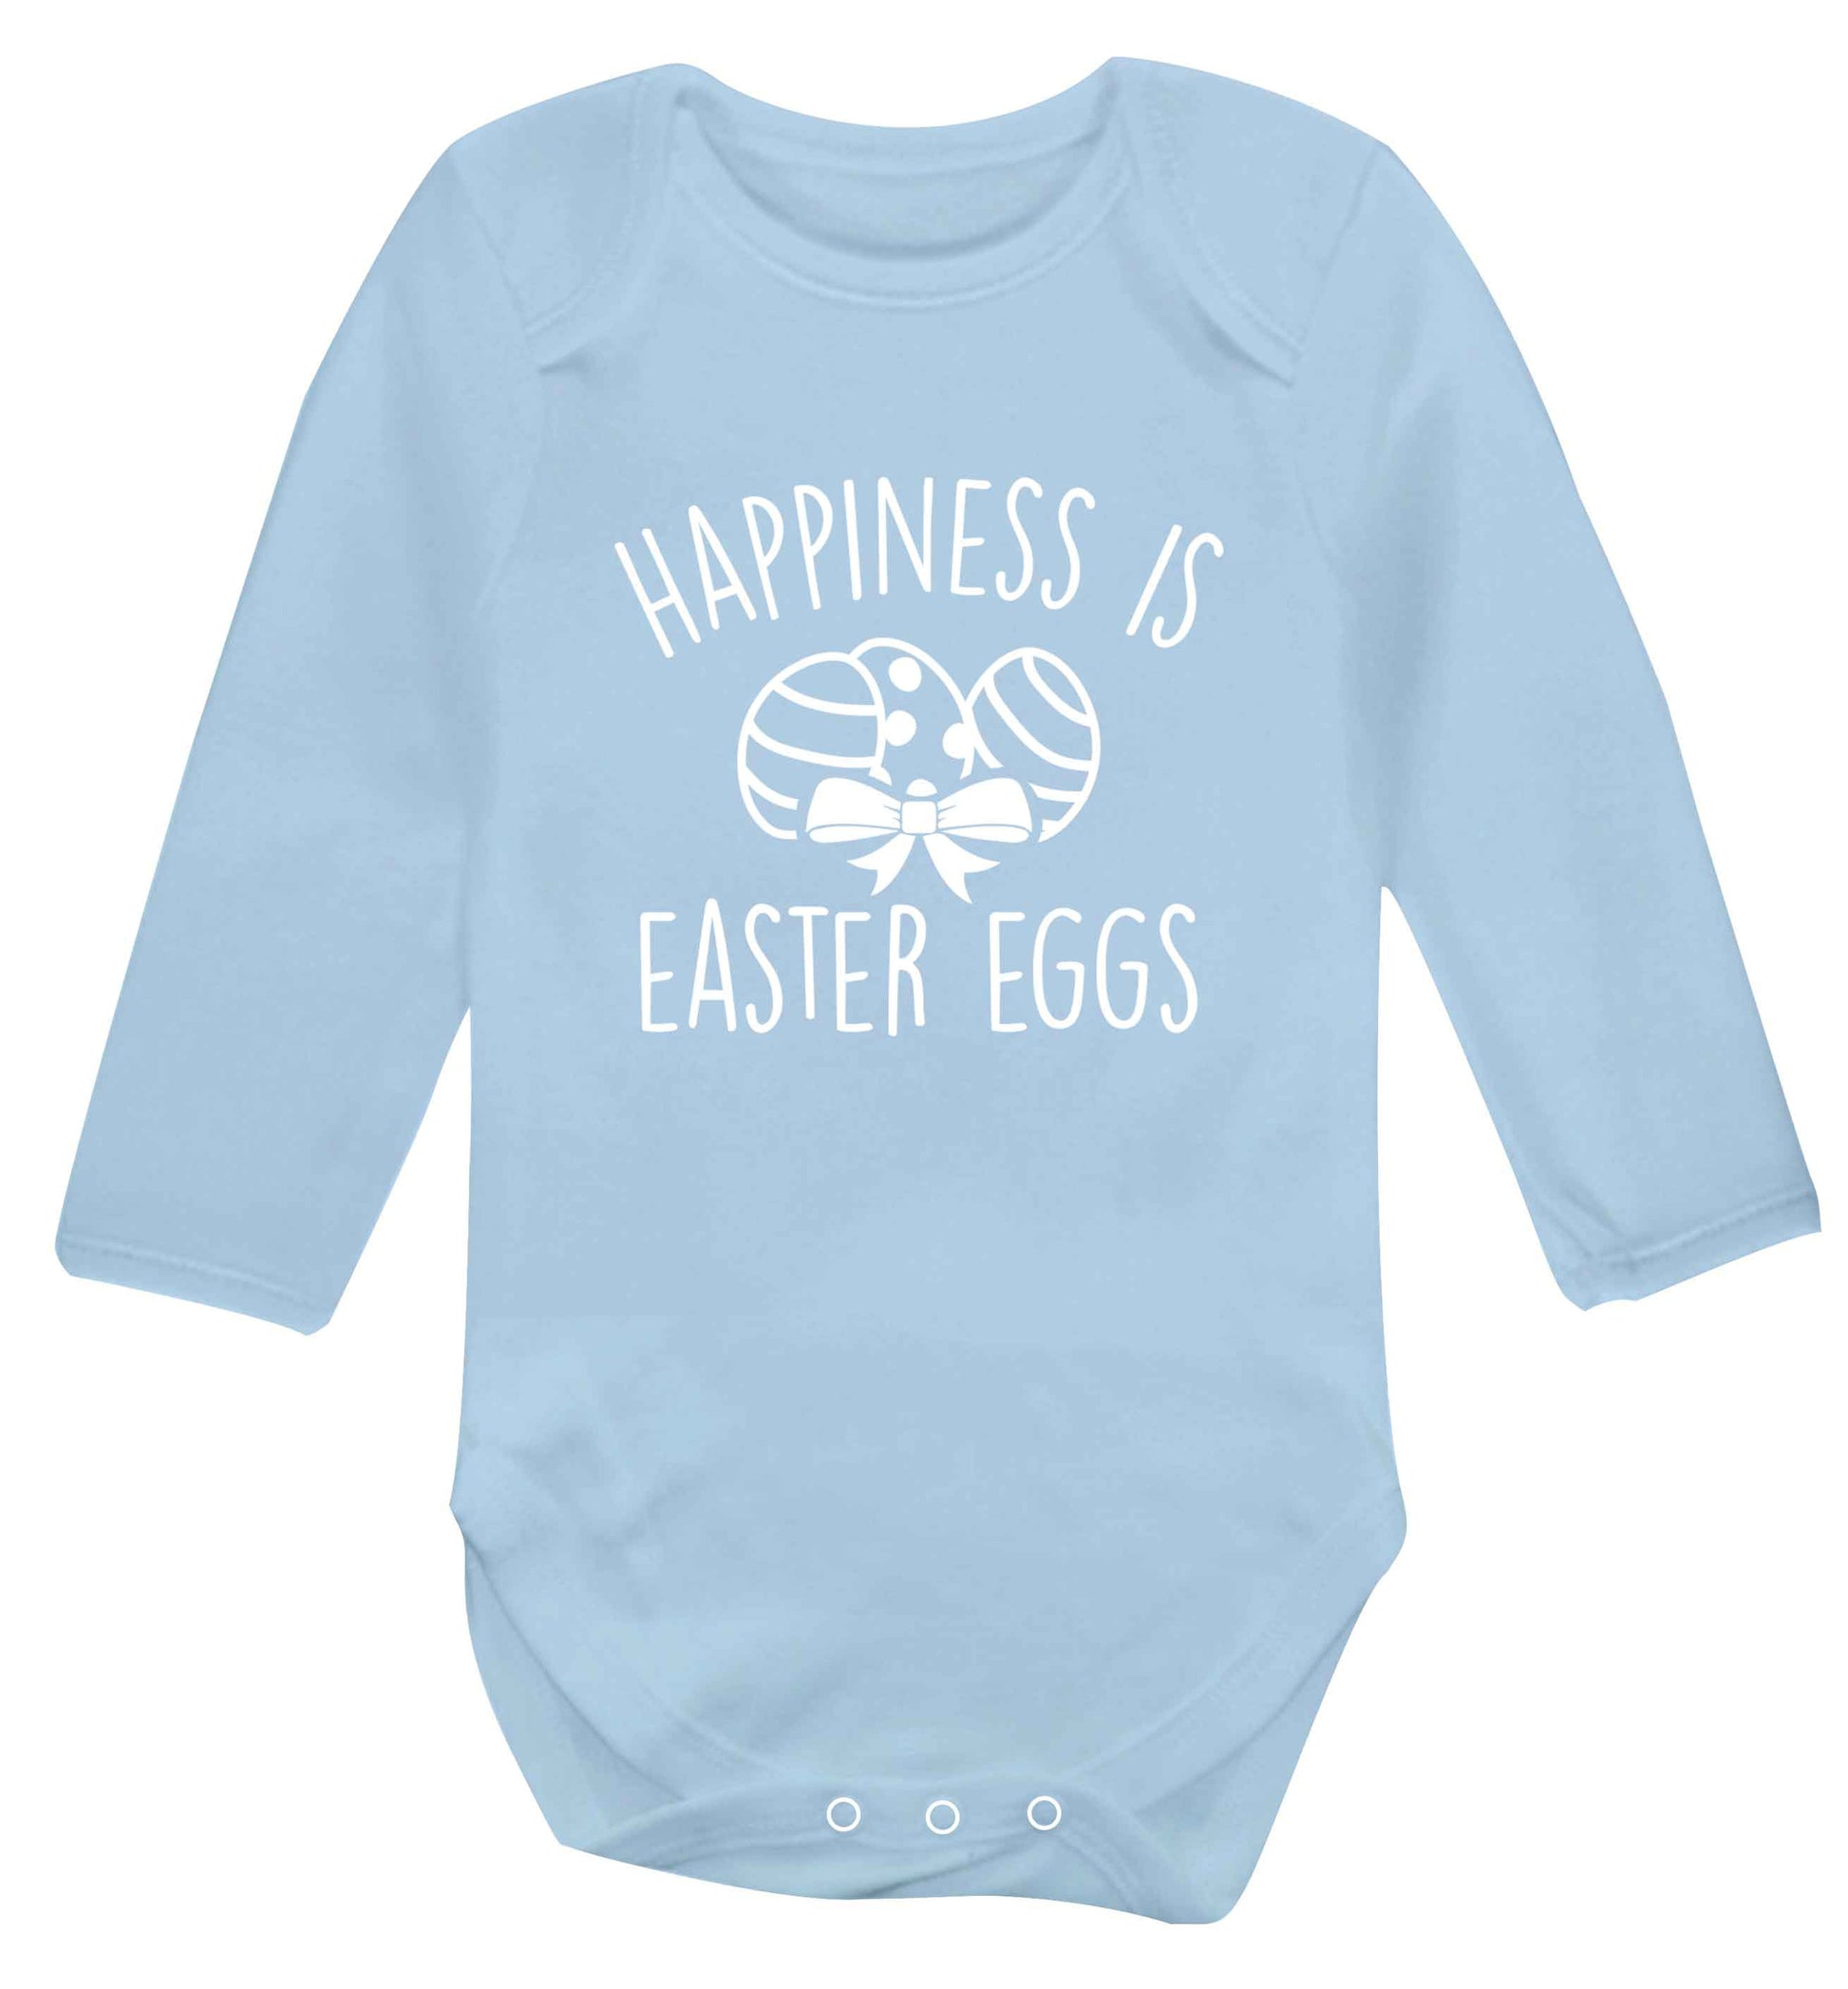 Happiness is Easter eggs baby vest long sleeved pale blue 6-12 months